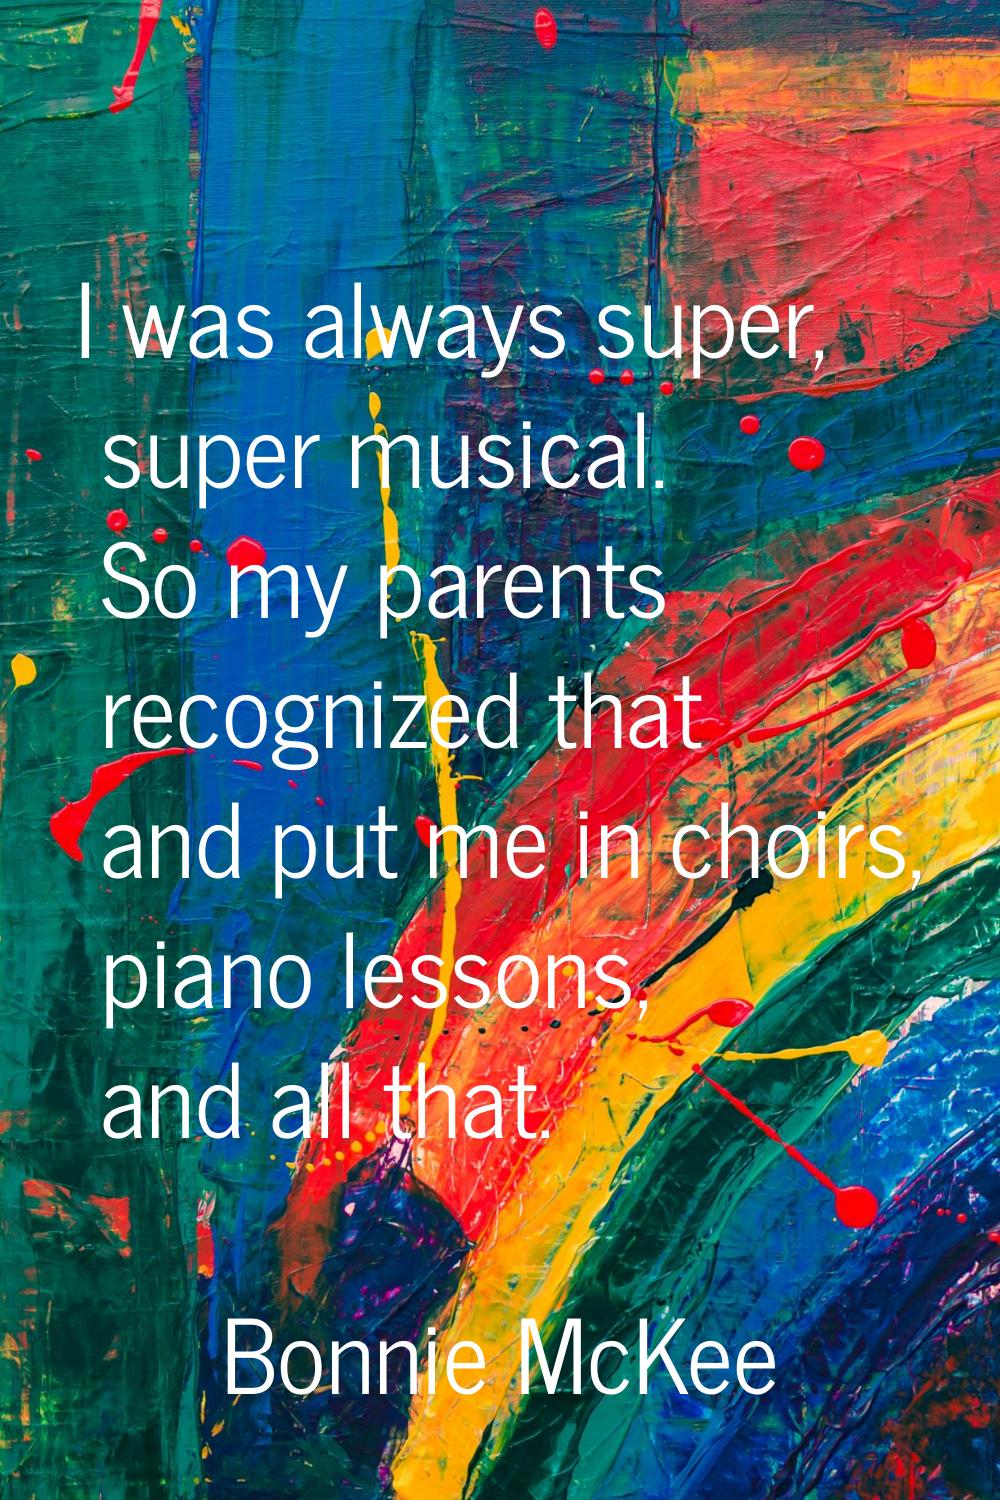 I was always super, super musical. So my parents recognized that and put me in choirs, piano lesson